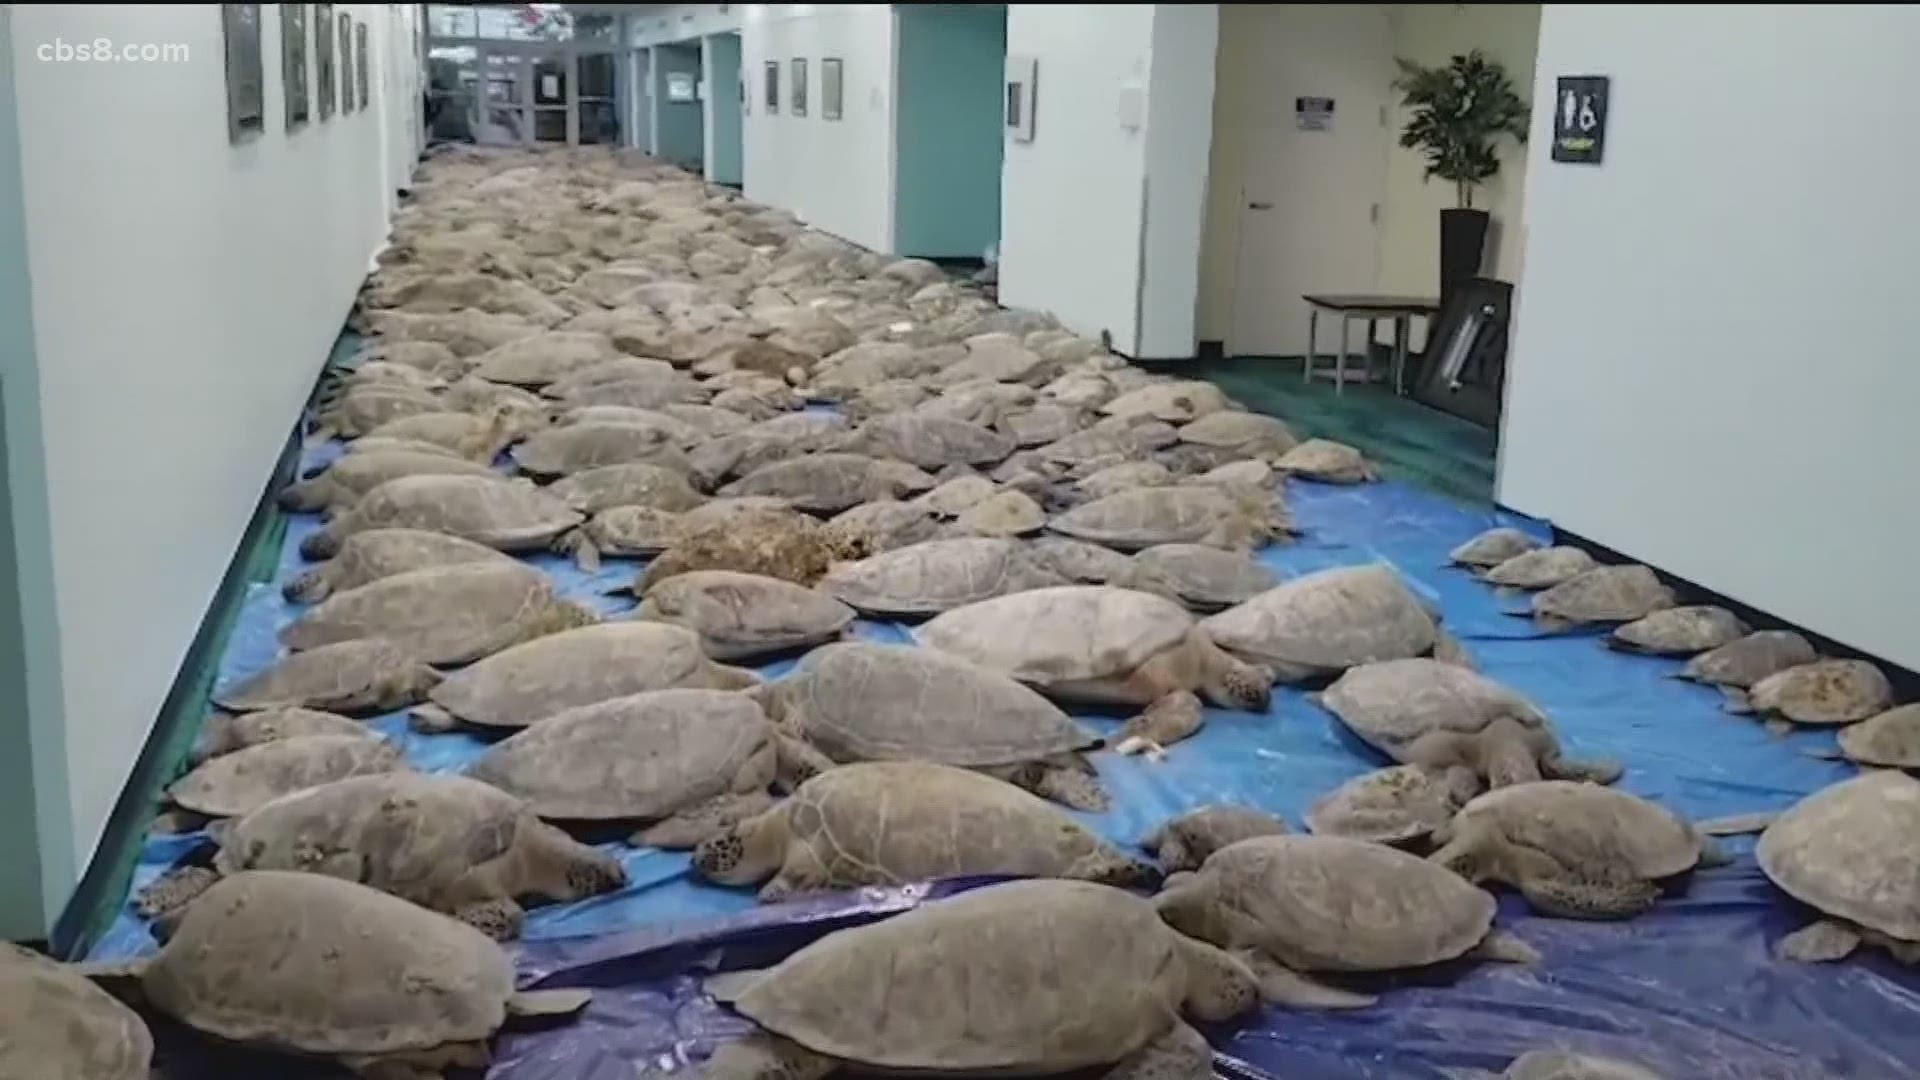 As Texas recovers from last week's arctic cold temperatures, thousands of frozen sea turtles are also thawing out.